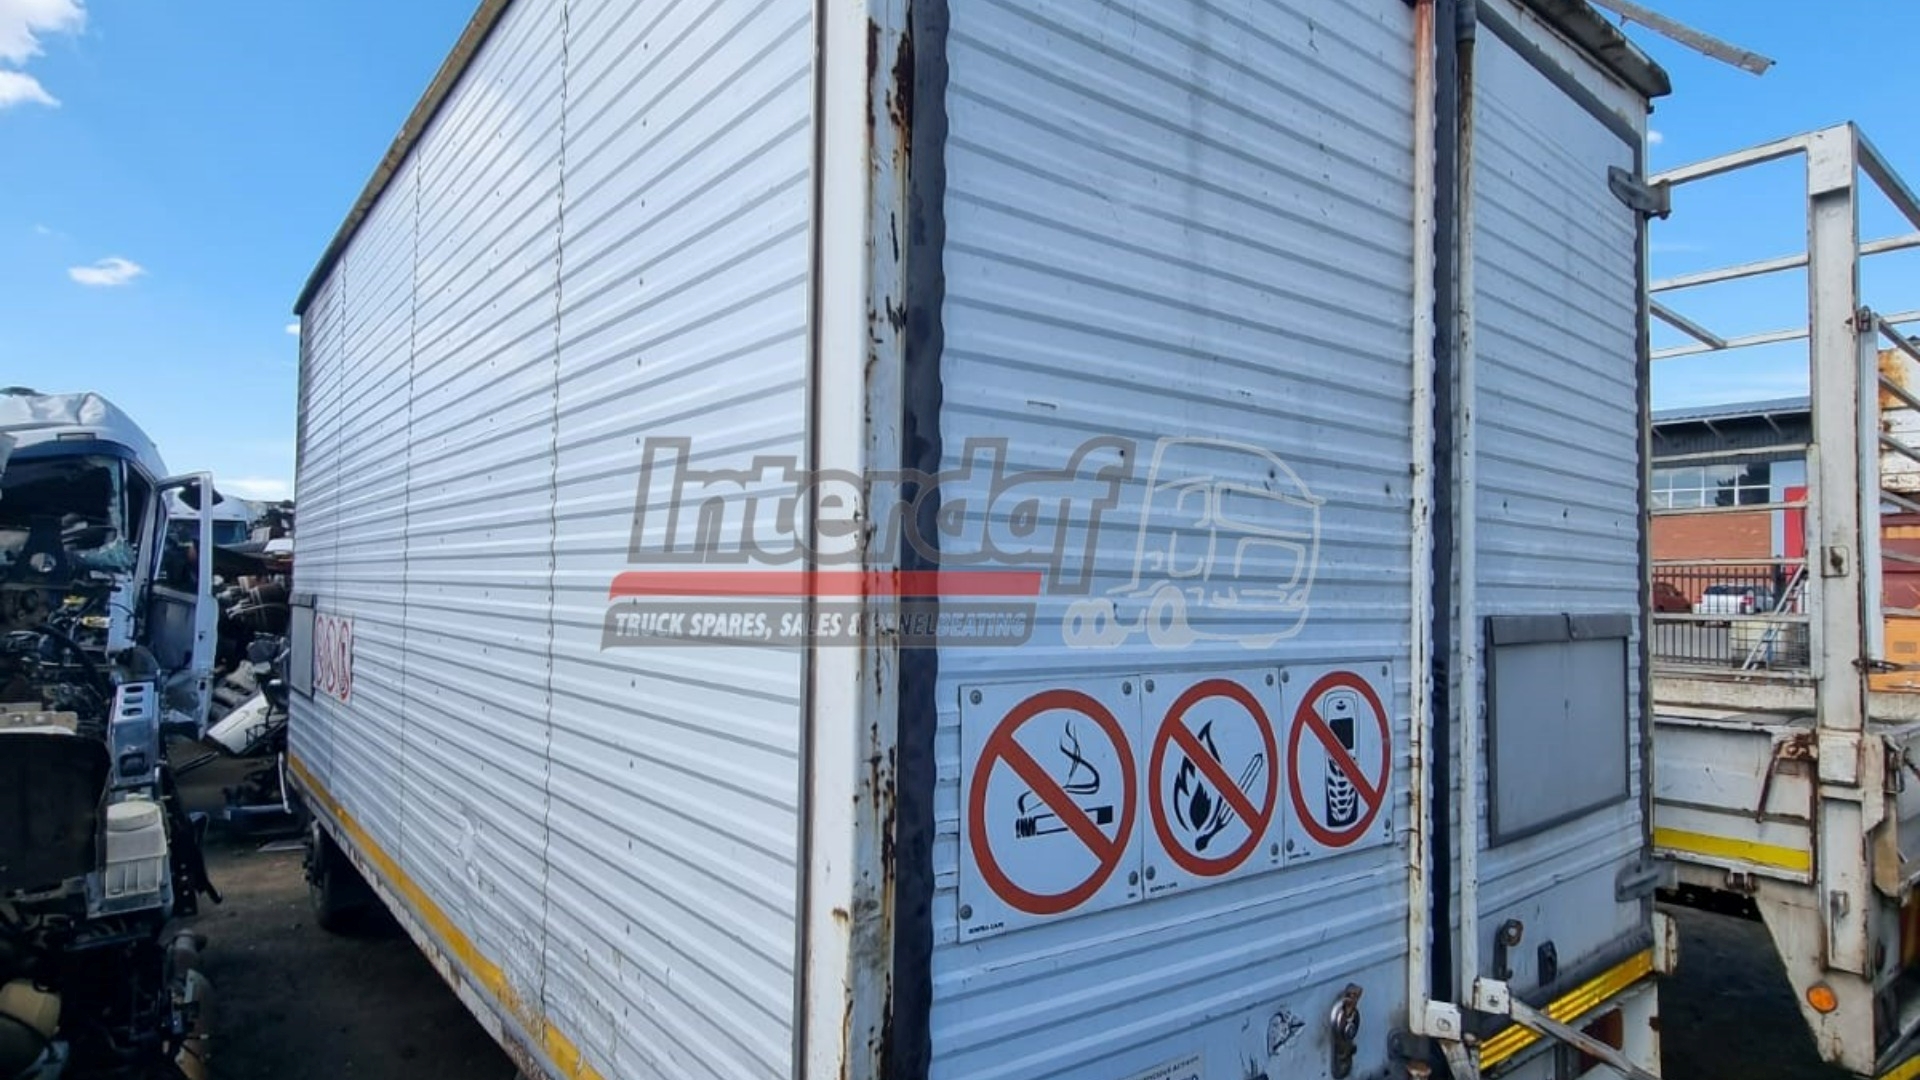 Box trailer Potential Storage Container for sale by Interdaf Trucks Pty Ltd | Truck & Trailer Marketplaces